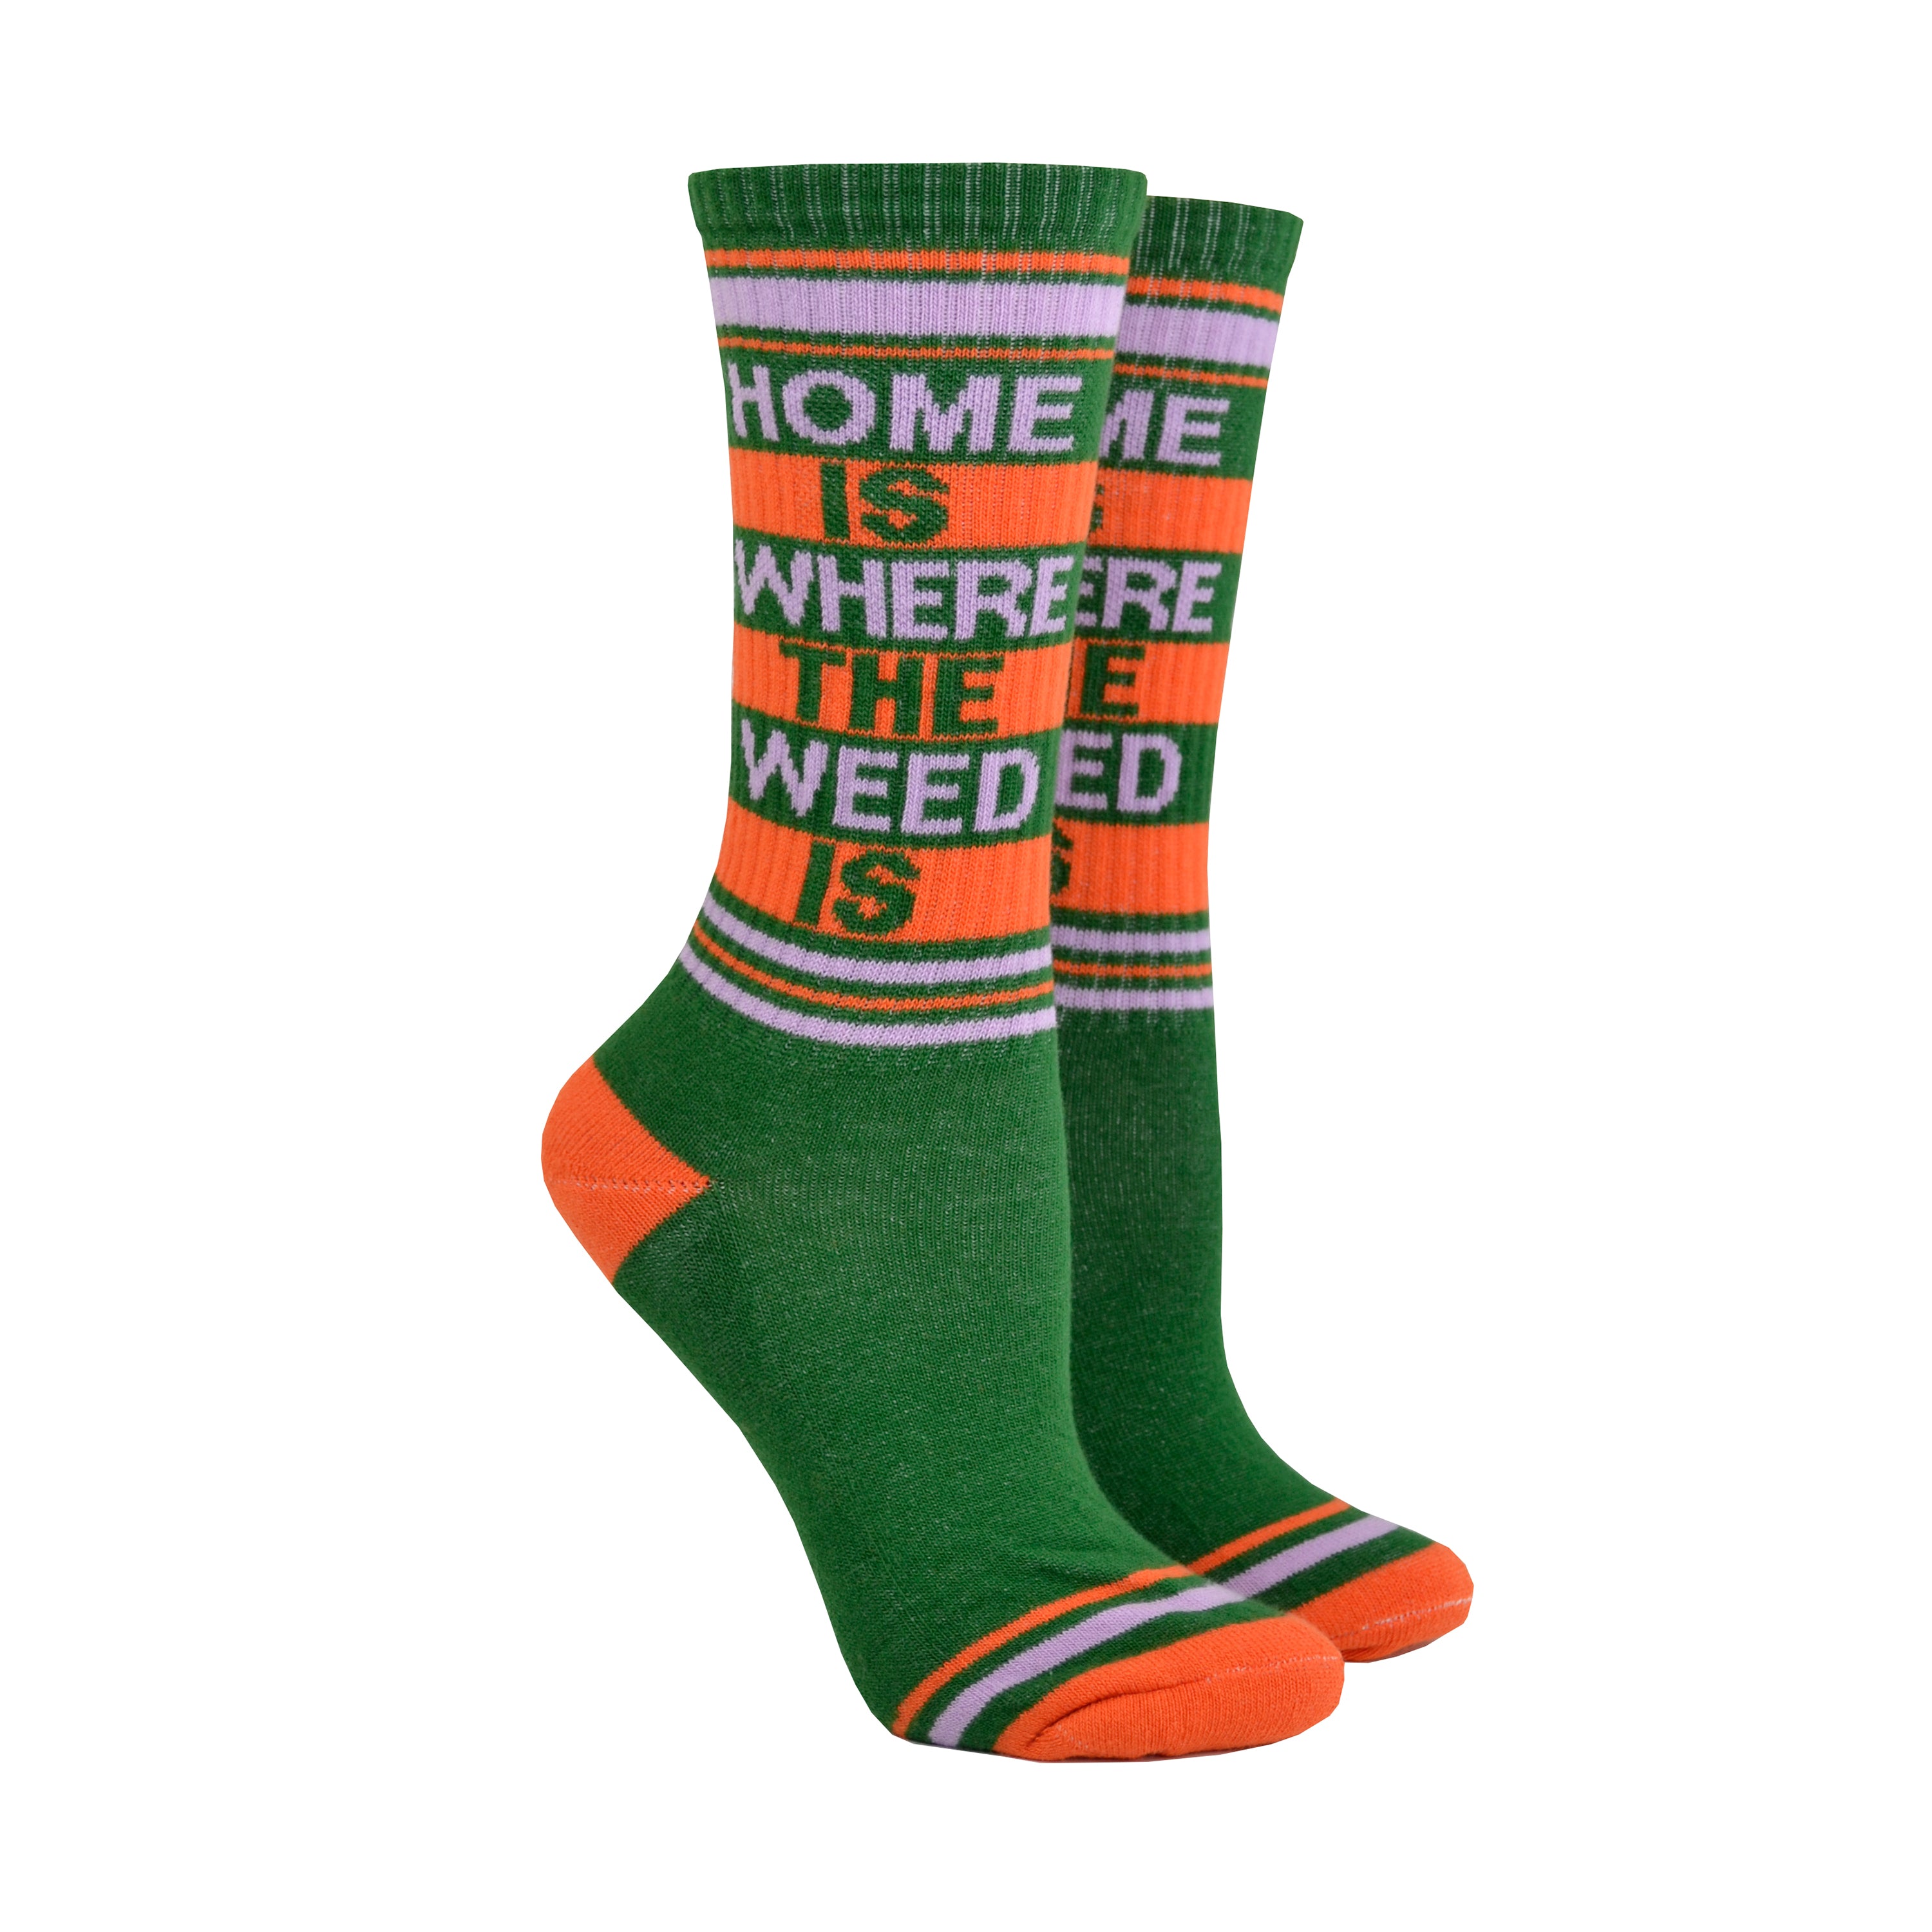 Shown on leg forms, a pair of Gumball Poodle unisex cotton crew sock in green with an orange and green striped toe and cuff. The leg features the words, 